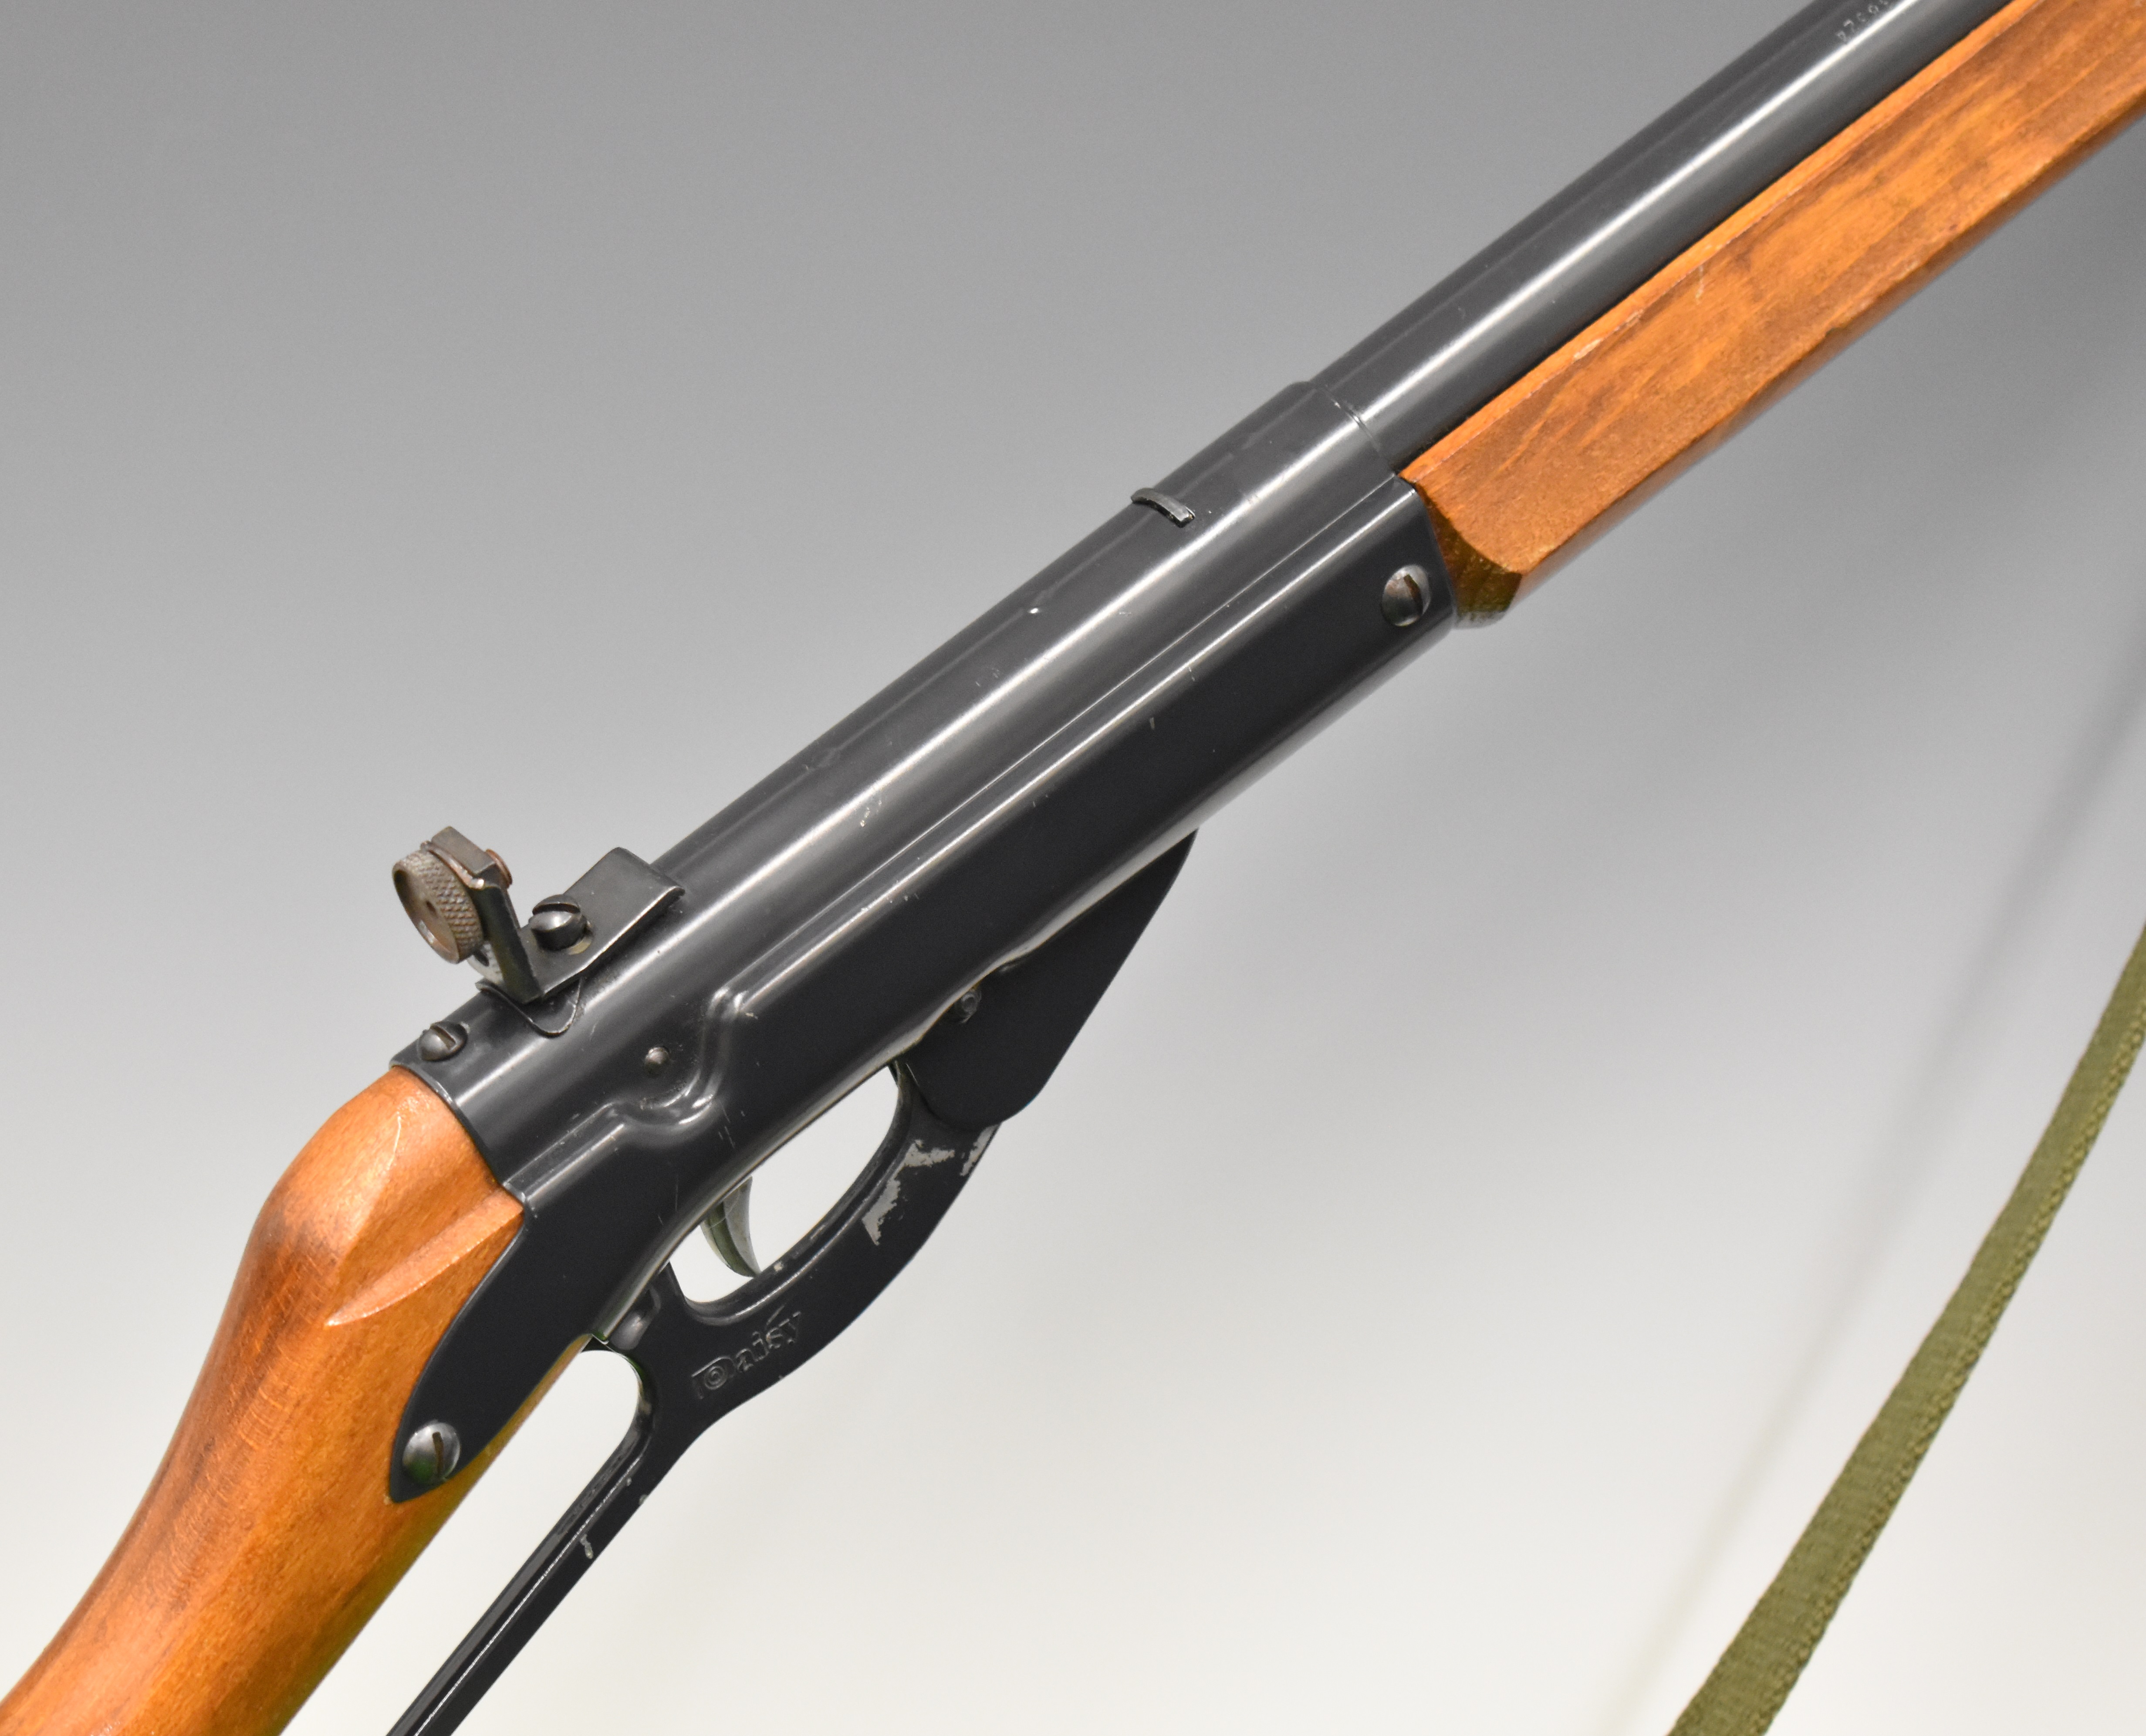 Daisy Model 99 Winchester style underlever-action air rifle with wooden grip and forend, canvas